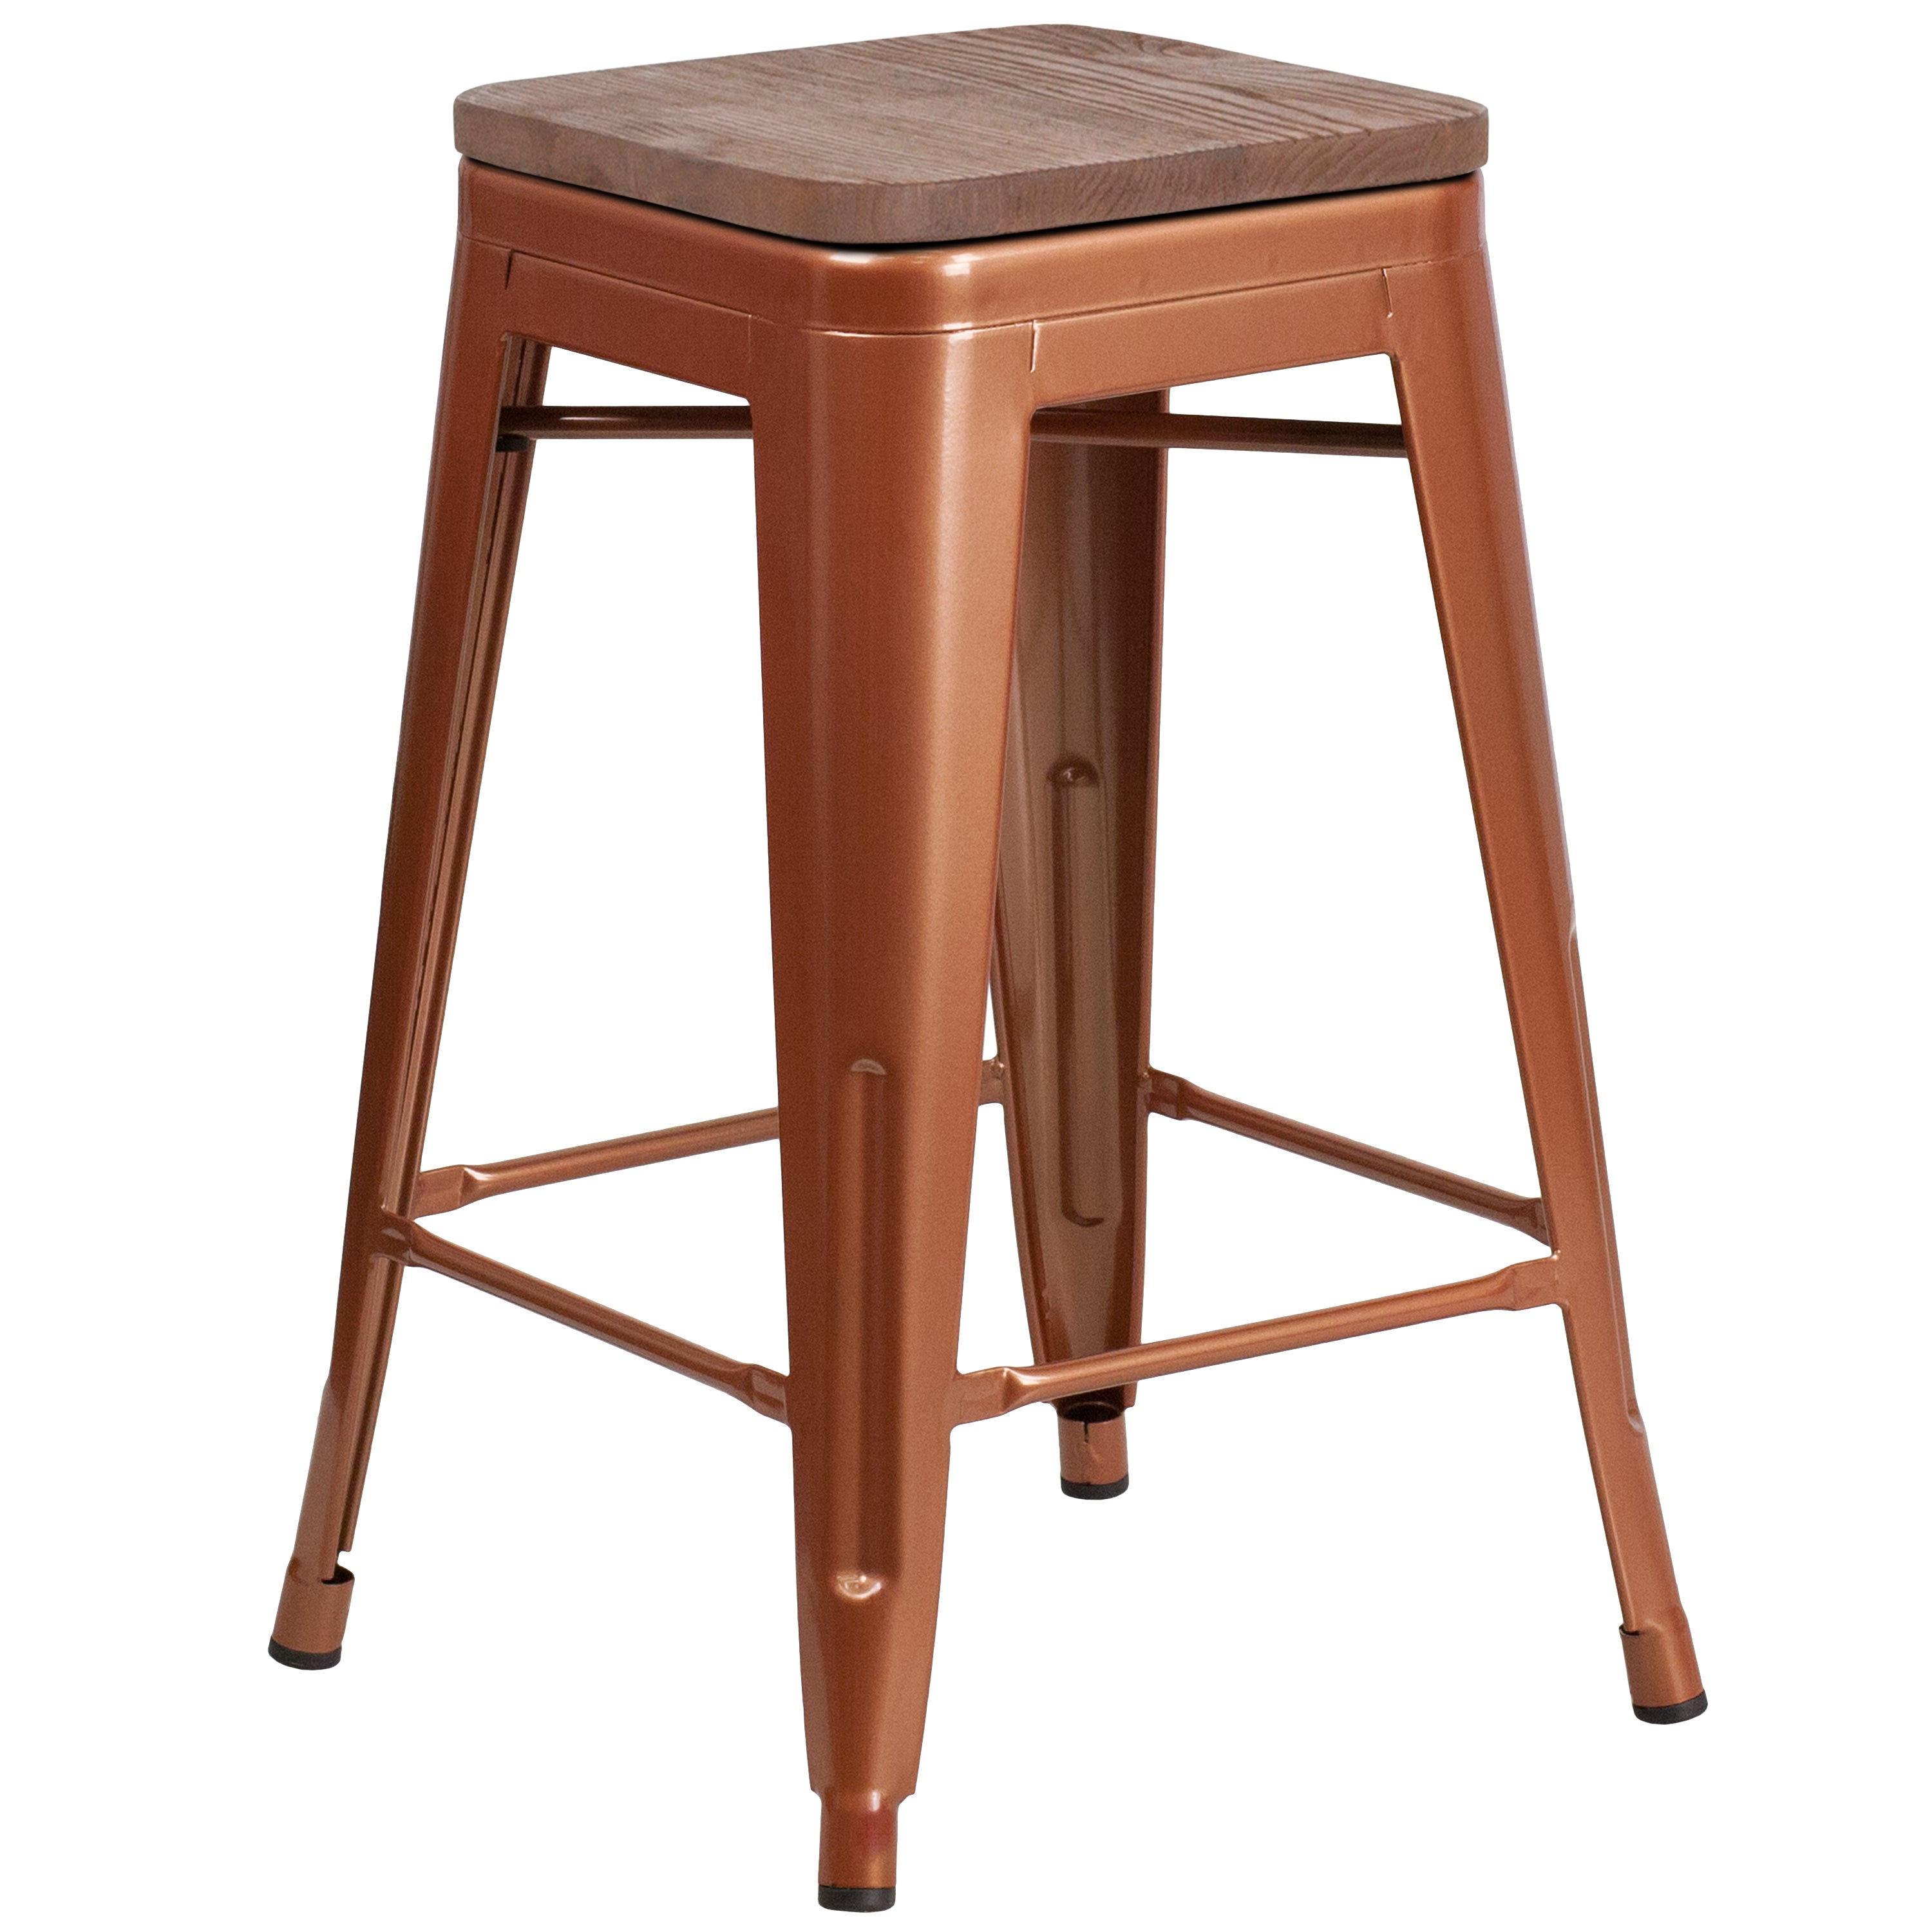 24" High Backless Counter Height Stool with Square Wood Seat-Metal/ Colorful Restaurant Counter Stool-Flash Furniture-Wall2Wall Furnishings